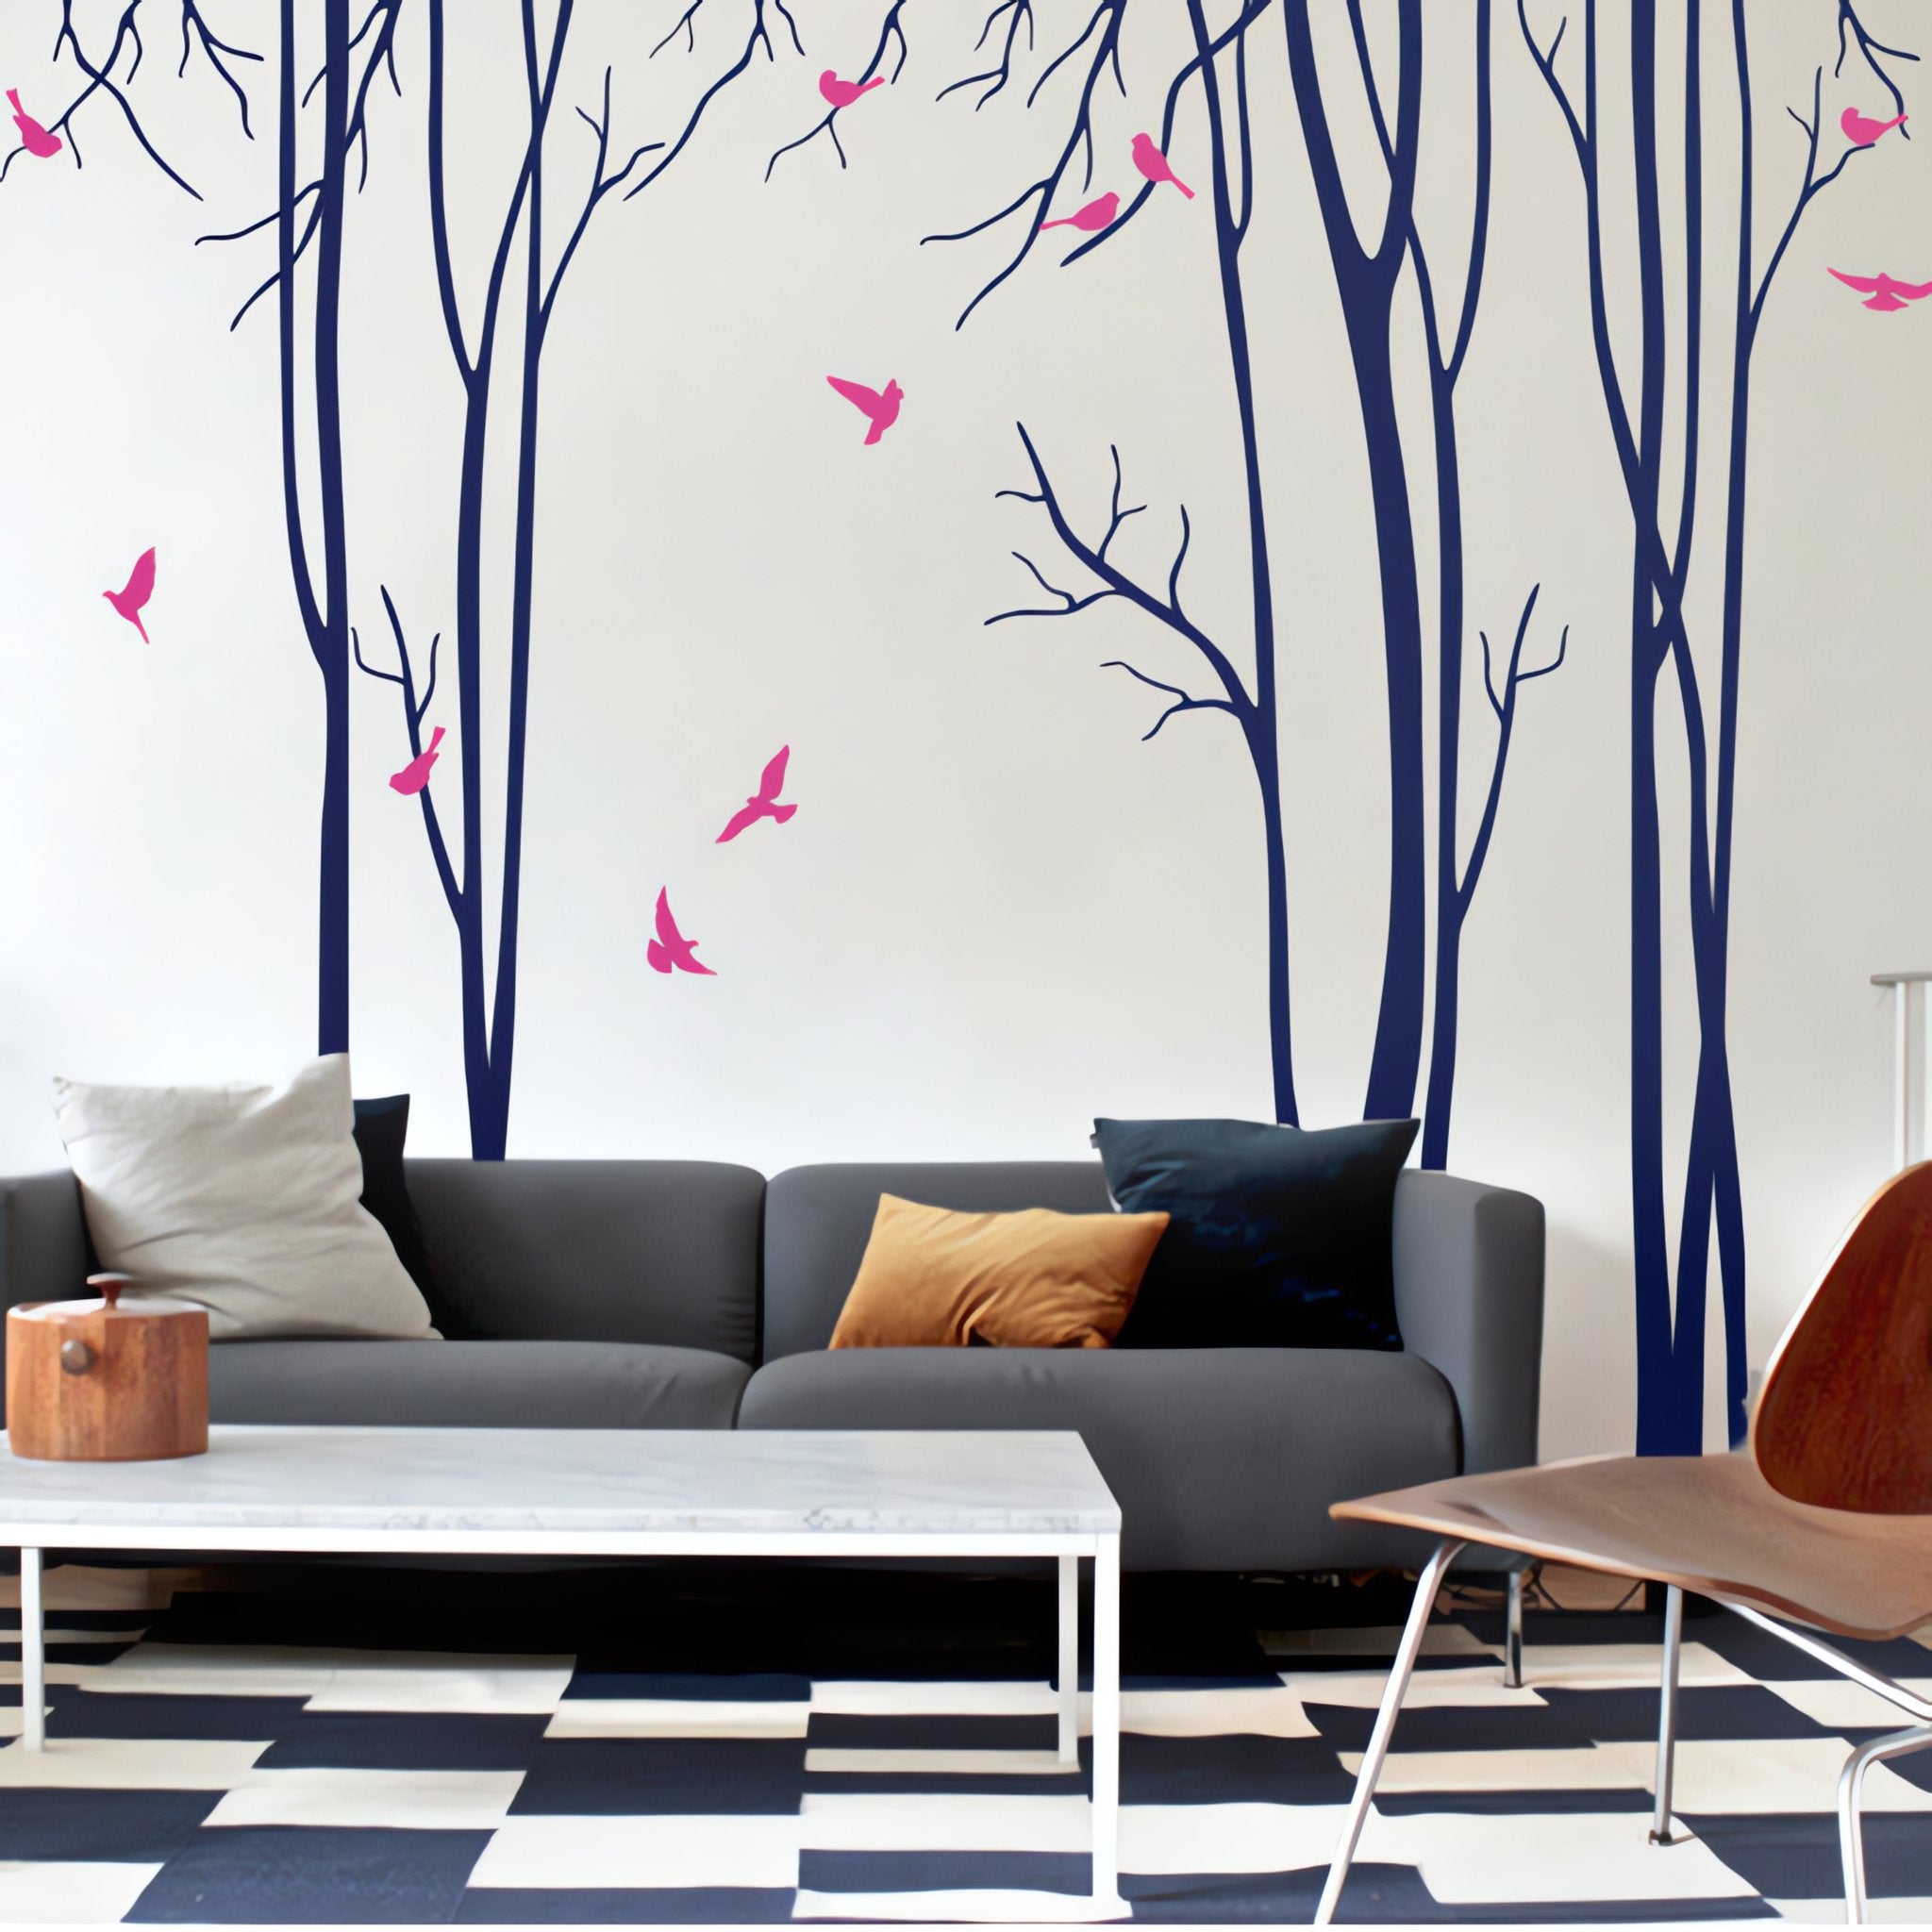 Tree wall sticker with stylish tall thin trees and birds in a living room with a coffee table, a sofa and a chair.